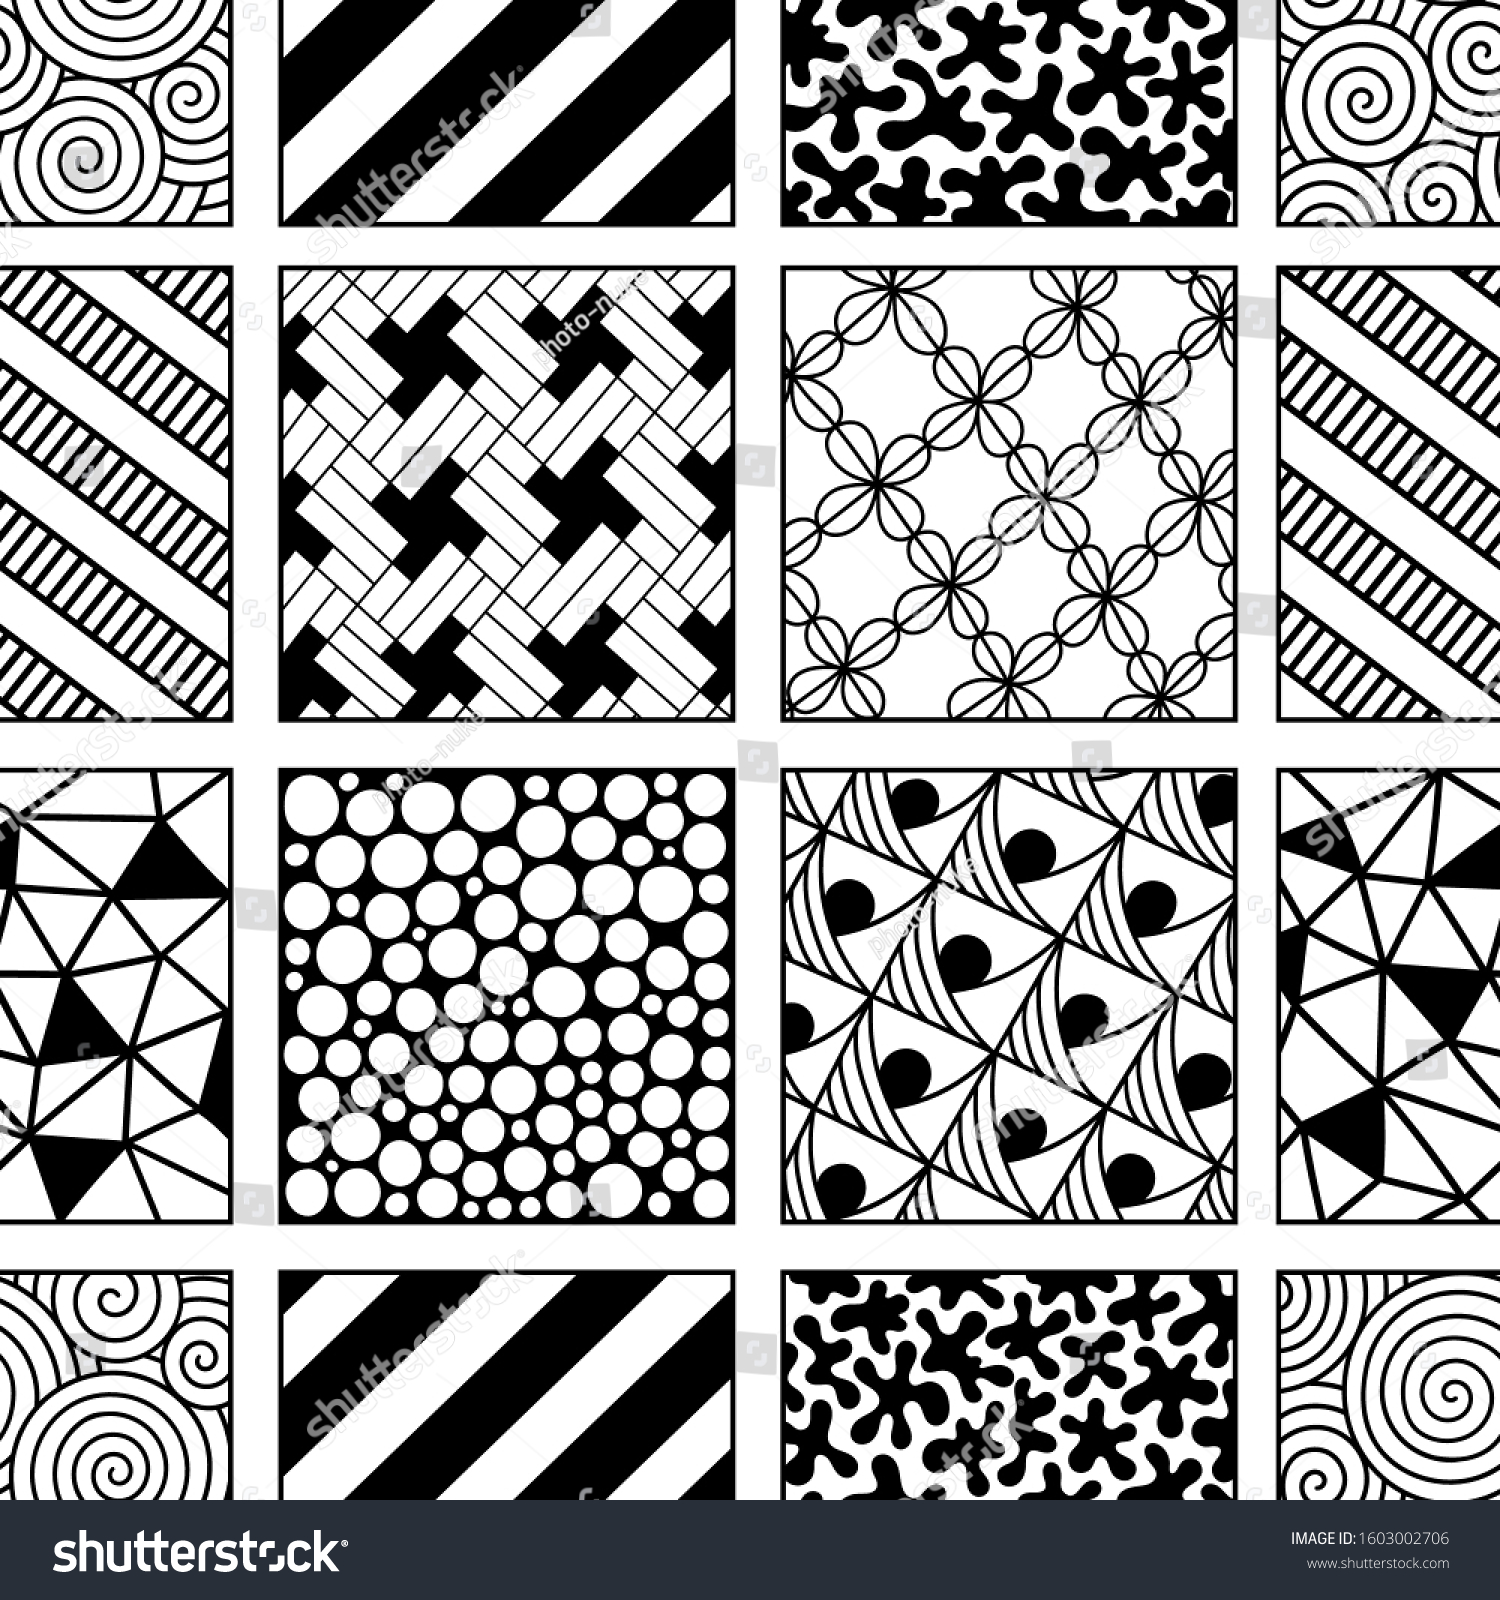 Vector Doodle Tile Pattern Handdrawn Mosaic Stock Vector (Royalty Free ...